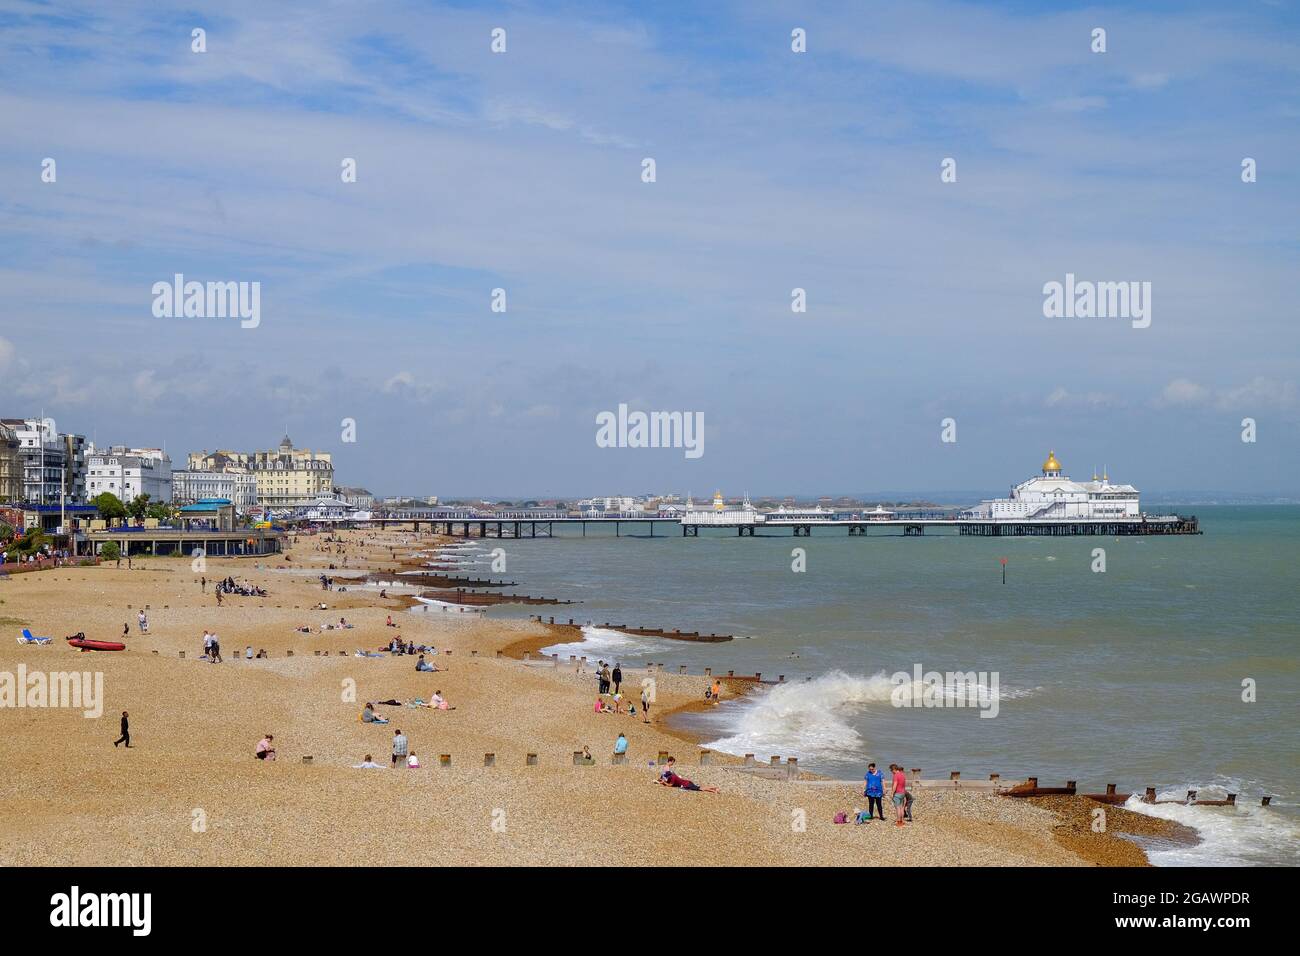 Eastbourne Pier and Beach, Eastbourne, East Sussex, Royaume-Uni Banque D'Images